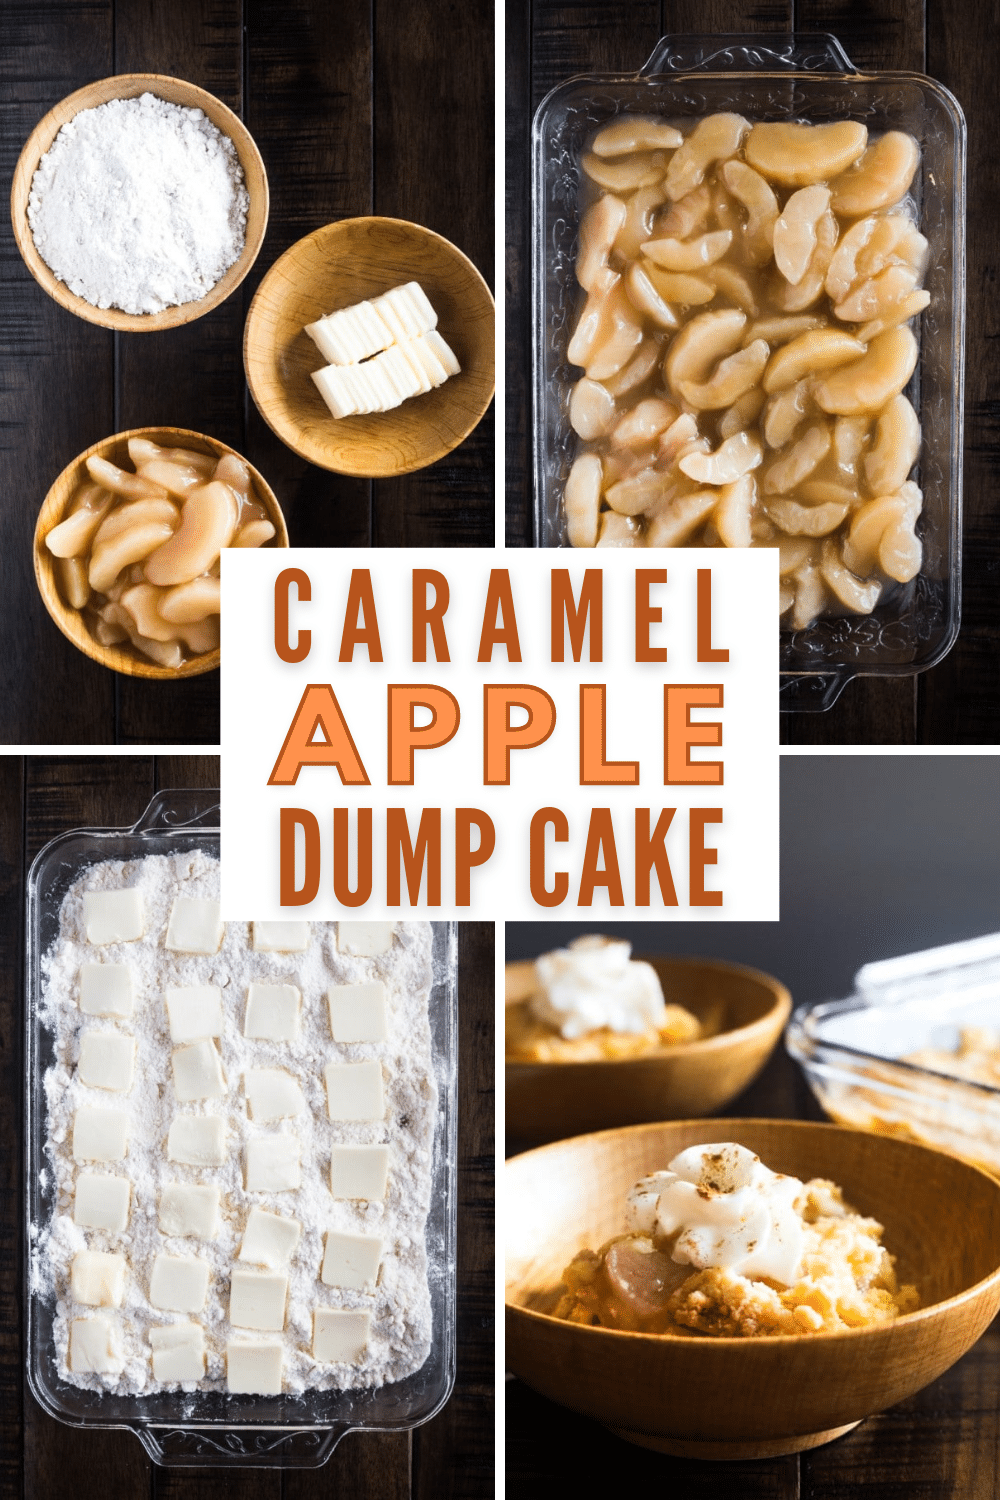 This caramel apple dump cake is a family favorite because it tastes amazing and only takes a few minutes to put together. Just 3 ingredients! #dumpcake #easydessert #caramelapple via @wondermomwannab